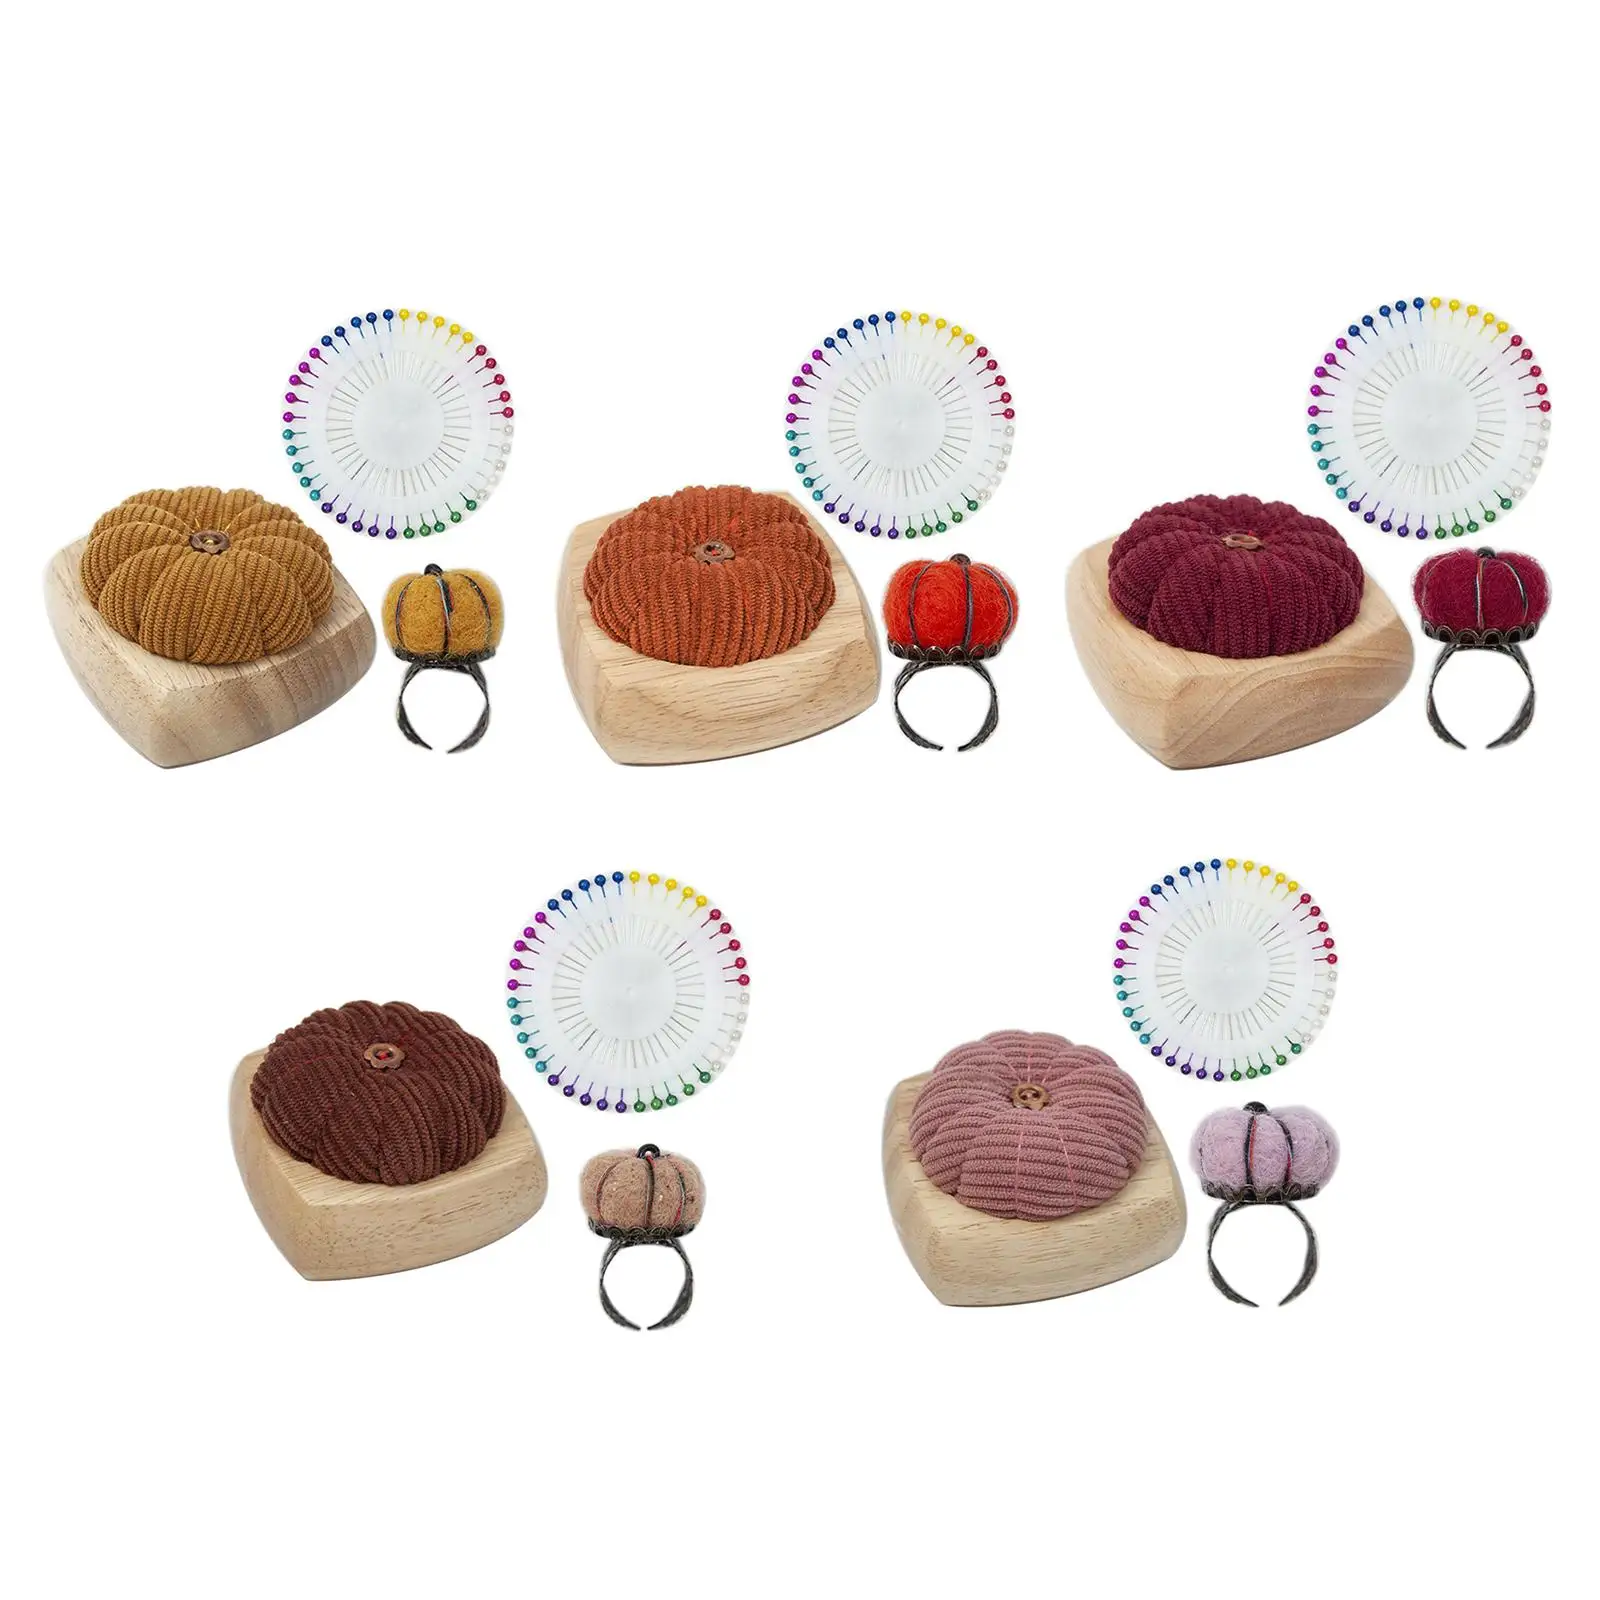 Pin Cushion Devices DIY Handcraft Tool with Wearable Pincushion for Jewelry Needlework Knitting Embroidery Craft